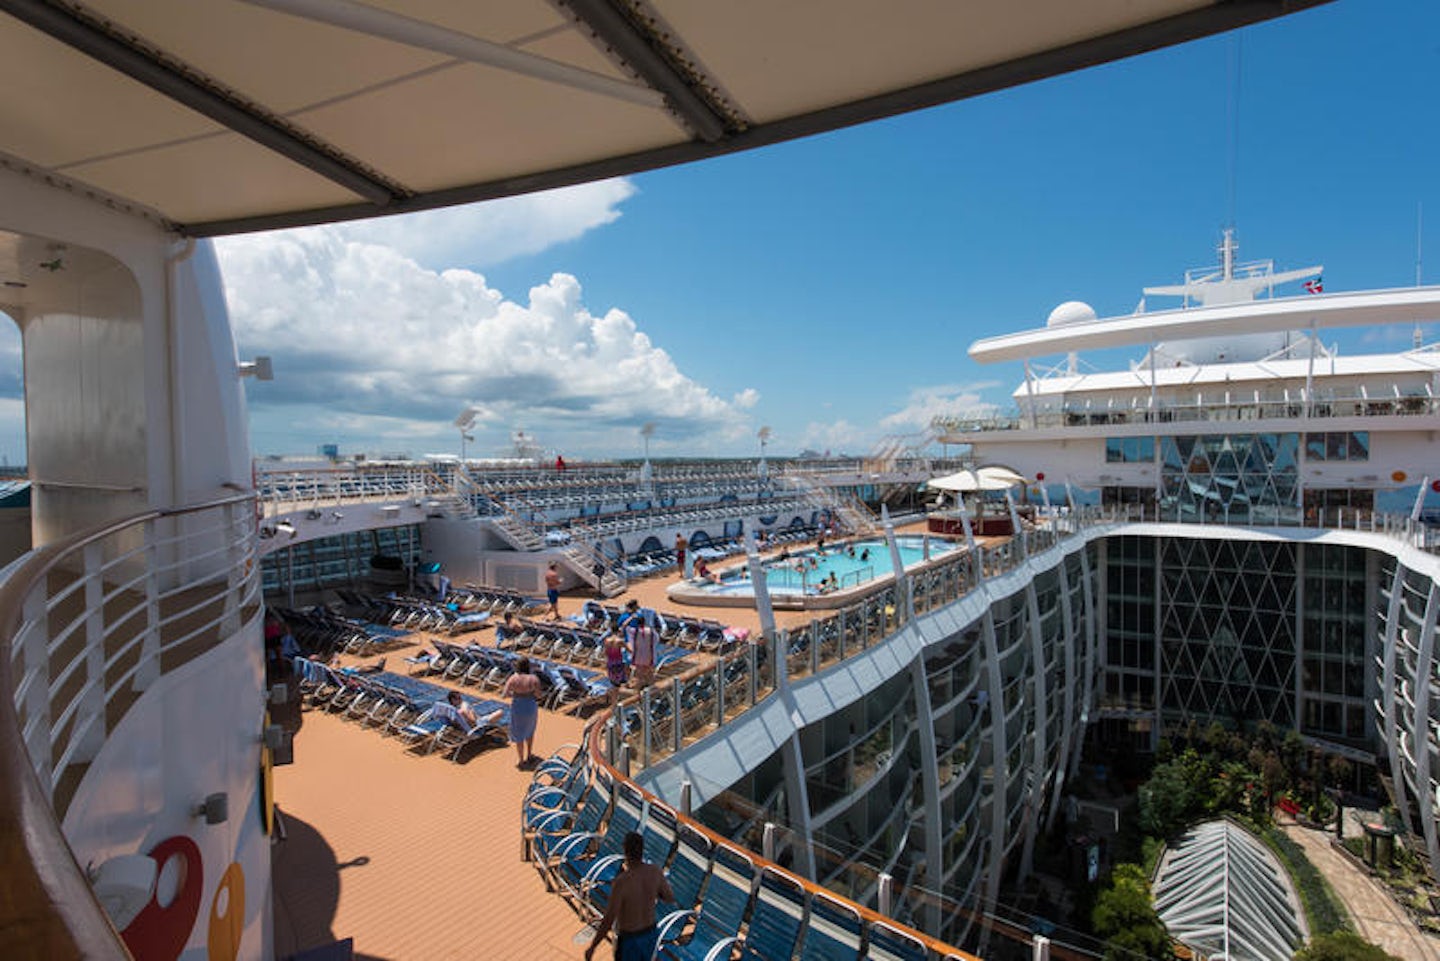 Ship Interiors and Exteriors on Oasis of the Seas